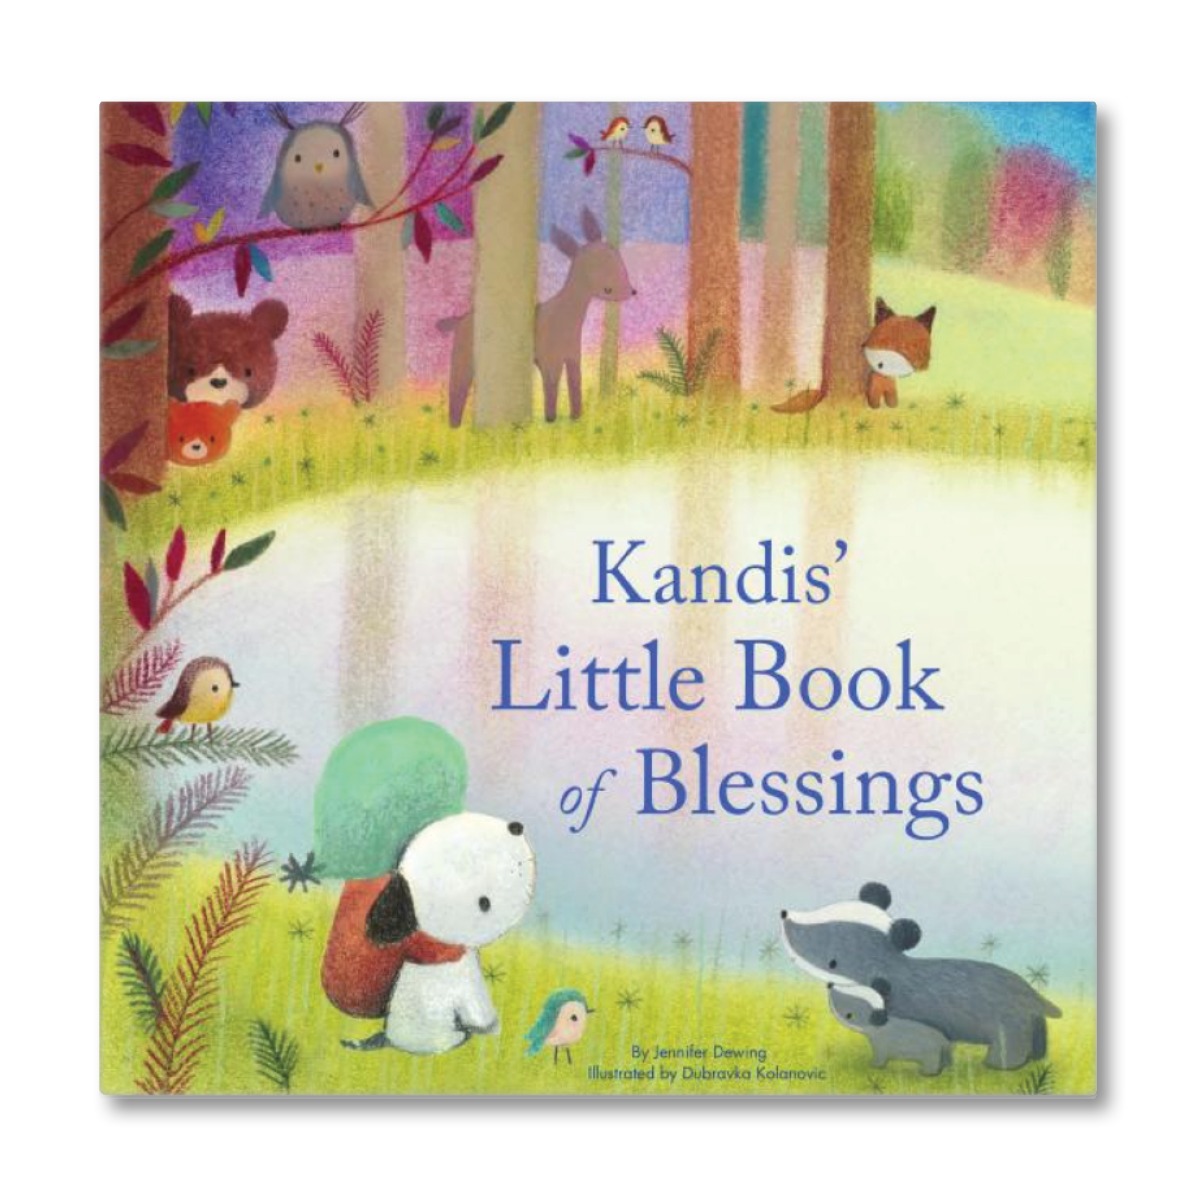 My Little Book of Blessings Personalized Book